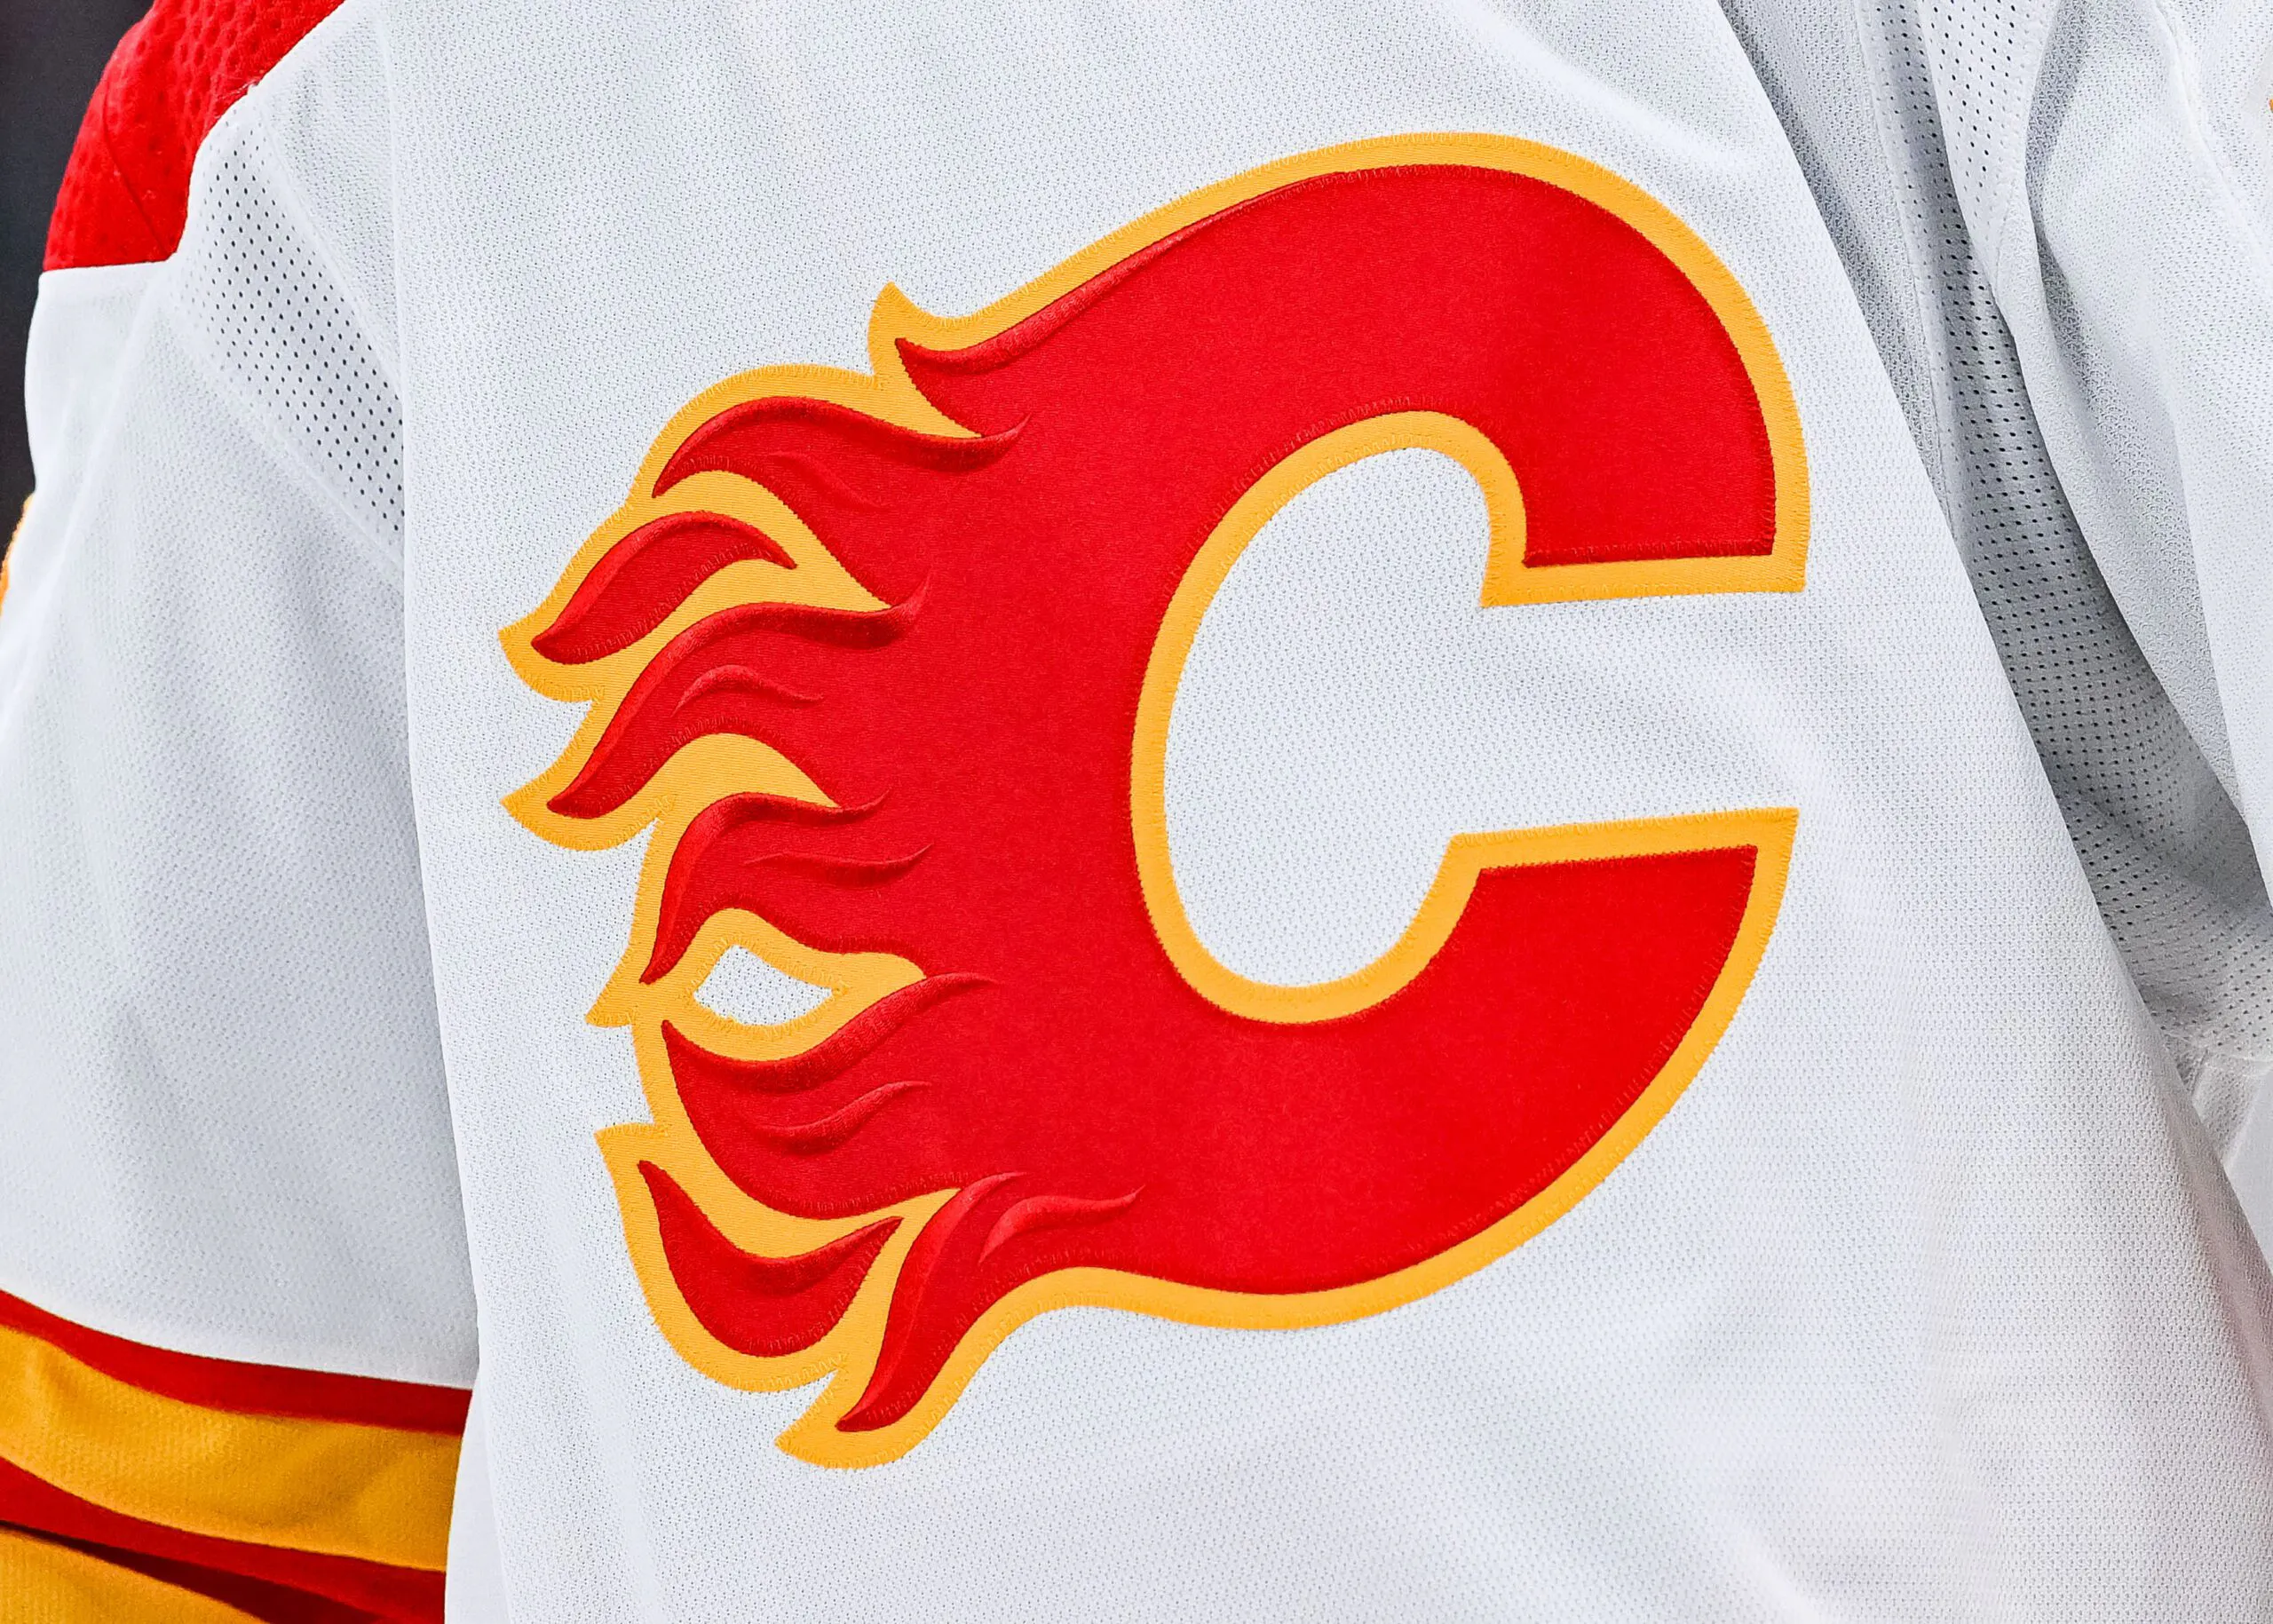 Calgary Flames reach initial agreement with city, province for new arena